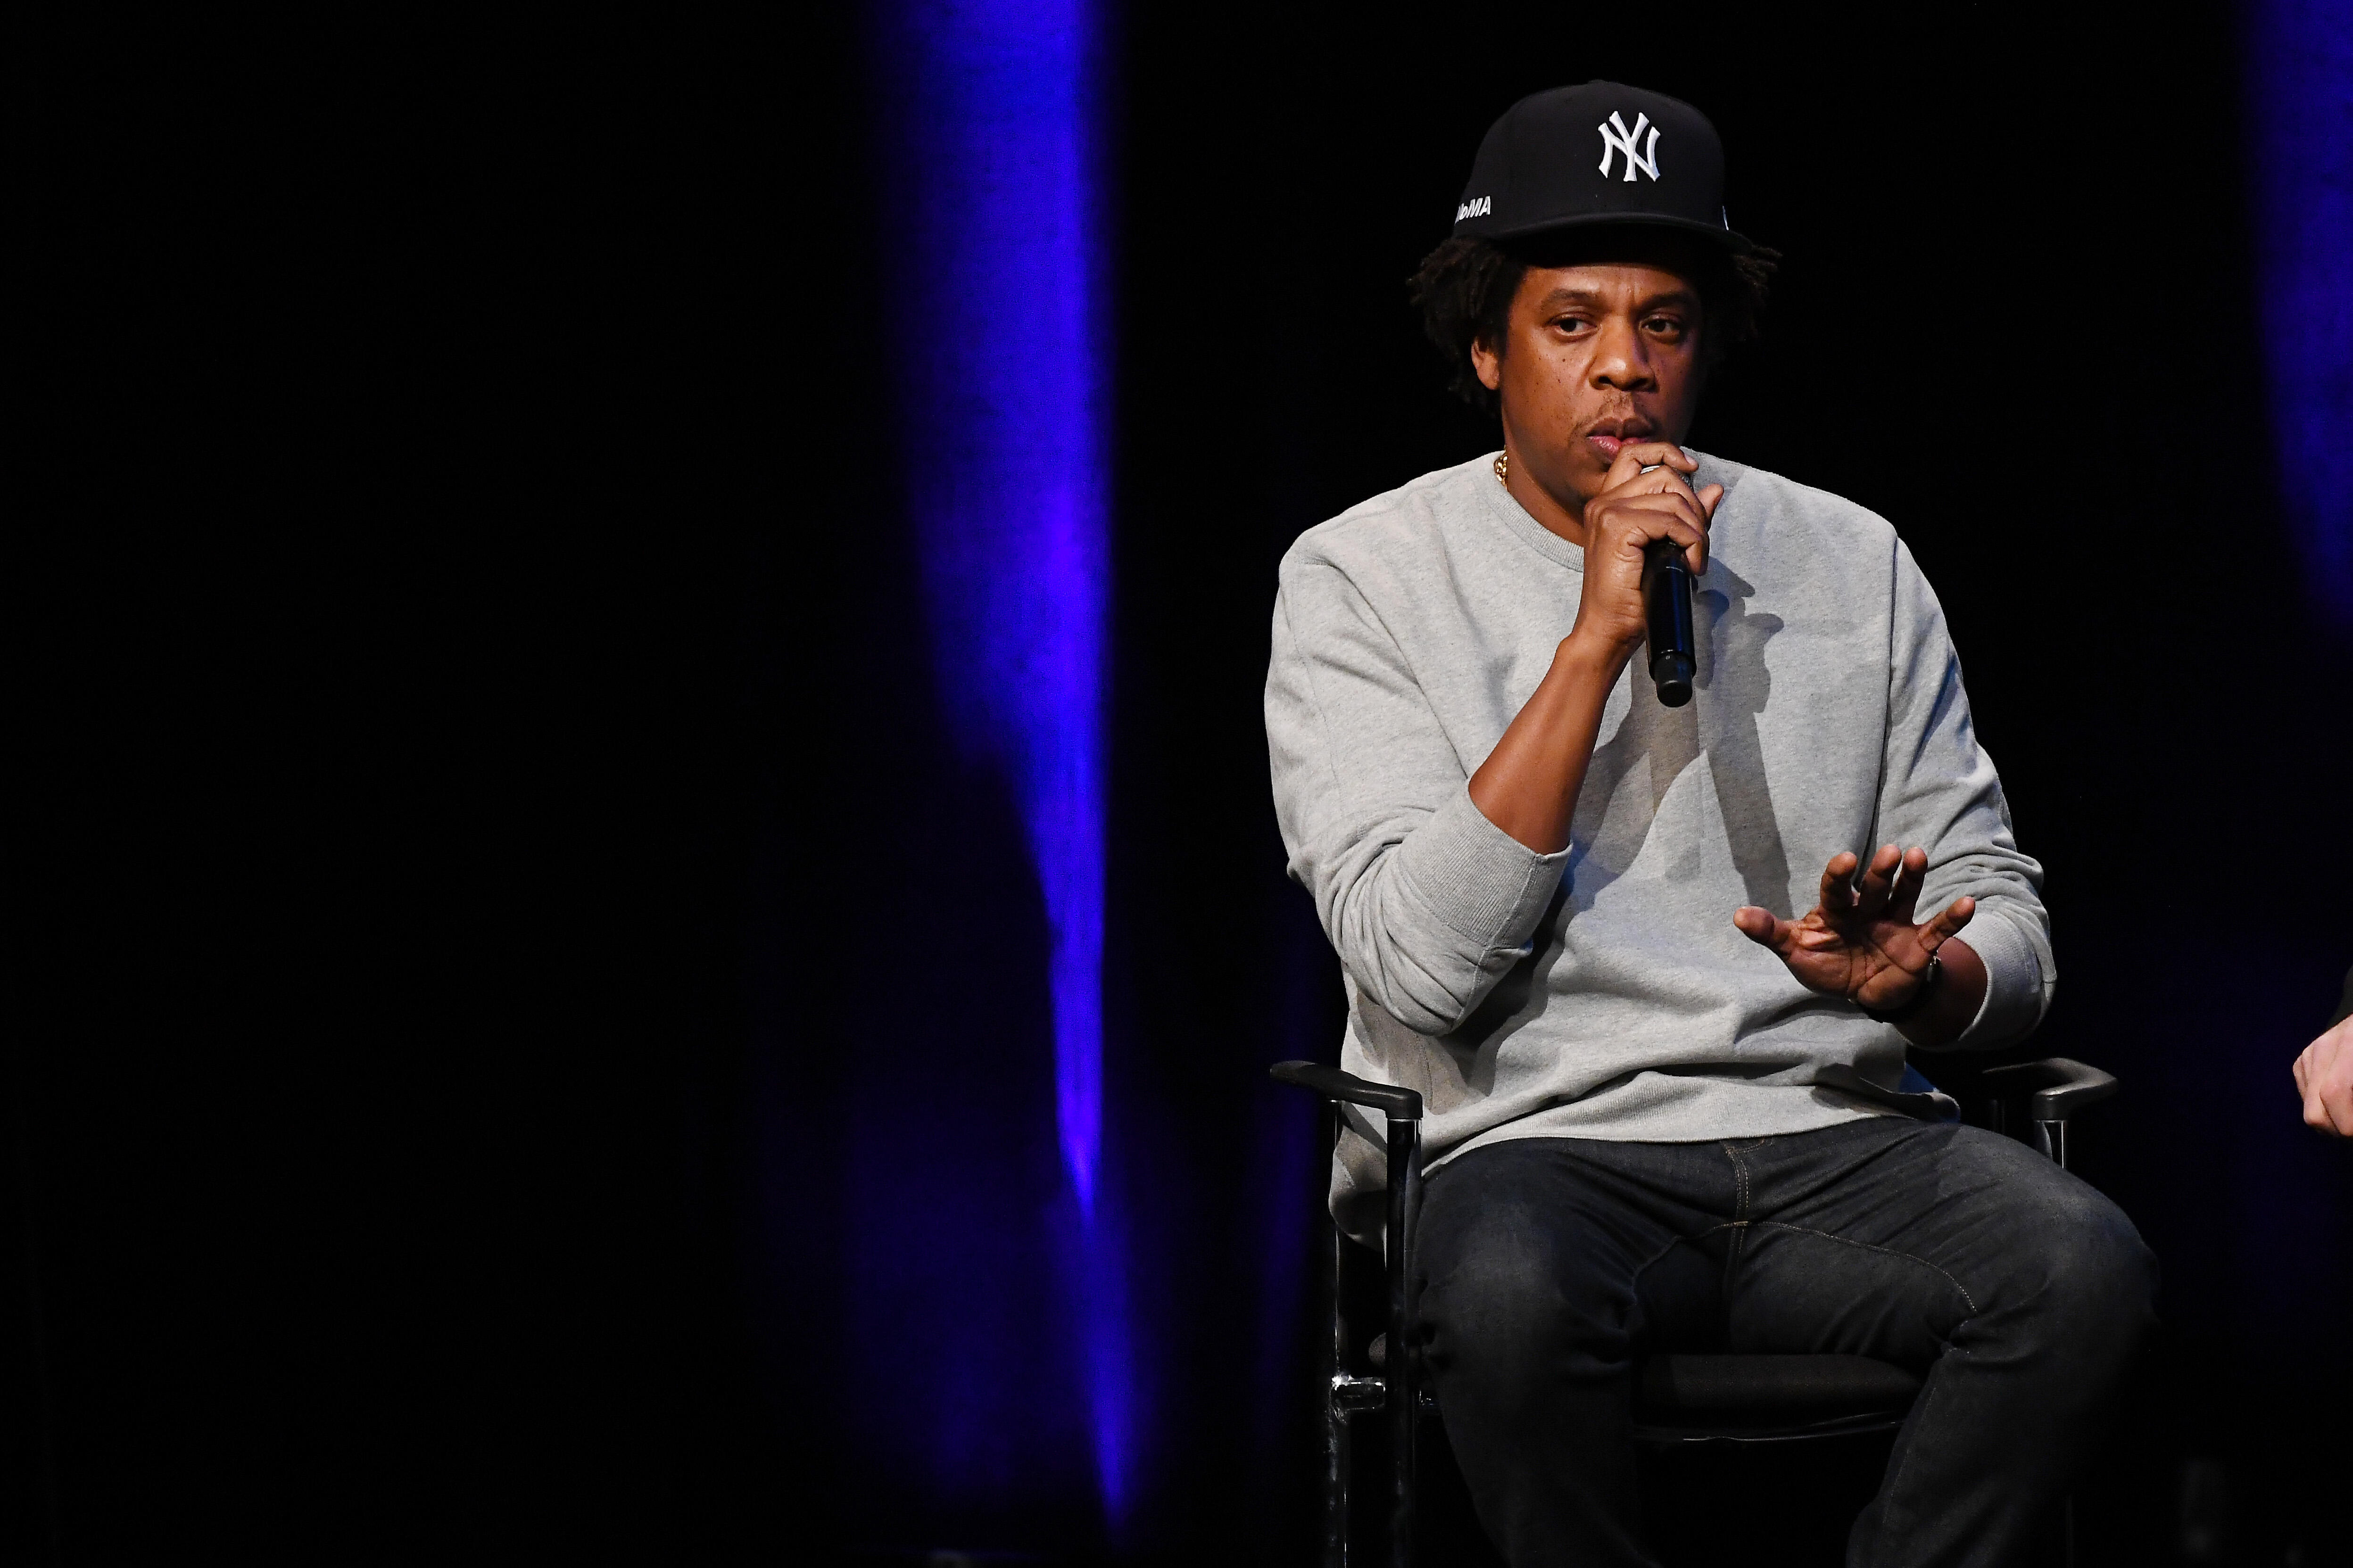 Jay-Z's 2019 Shawn Carter Scholarship Program Is Now Open - Thumbnail Image